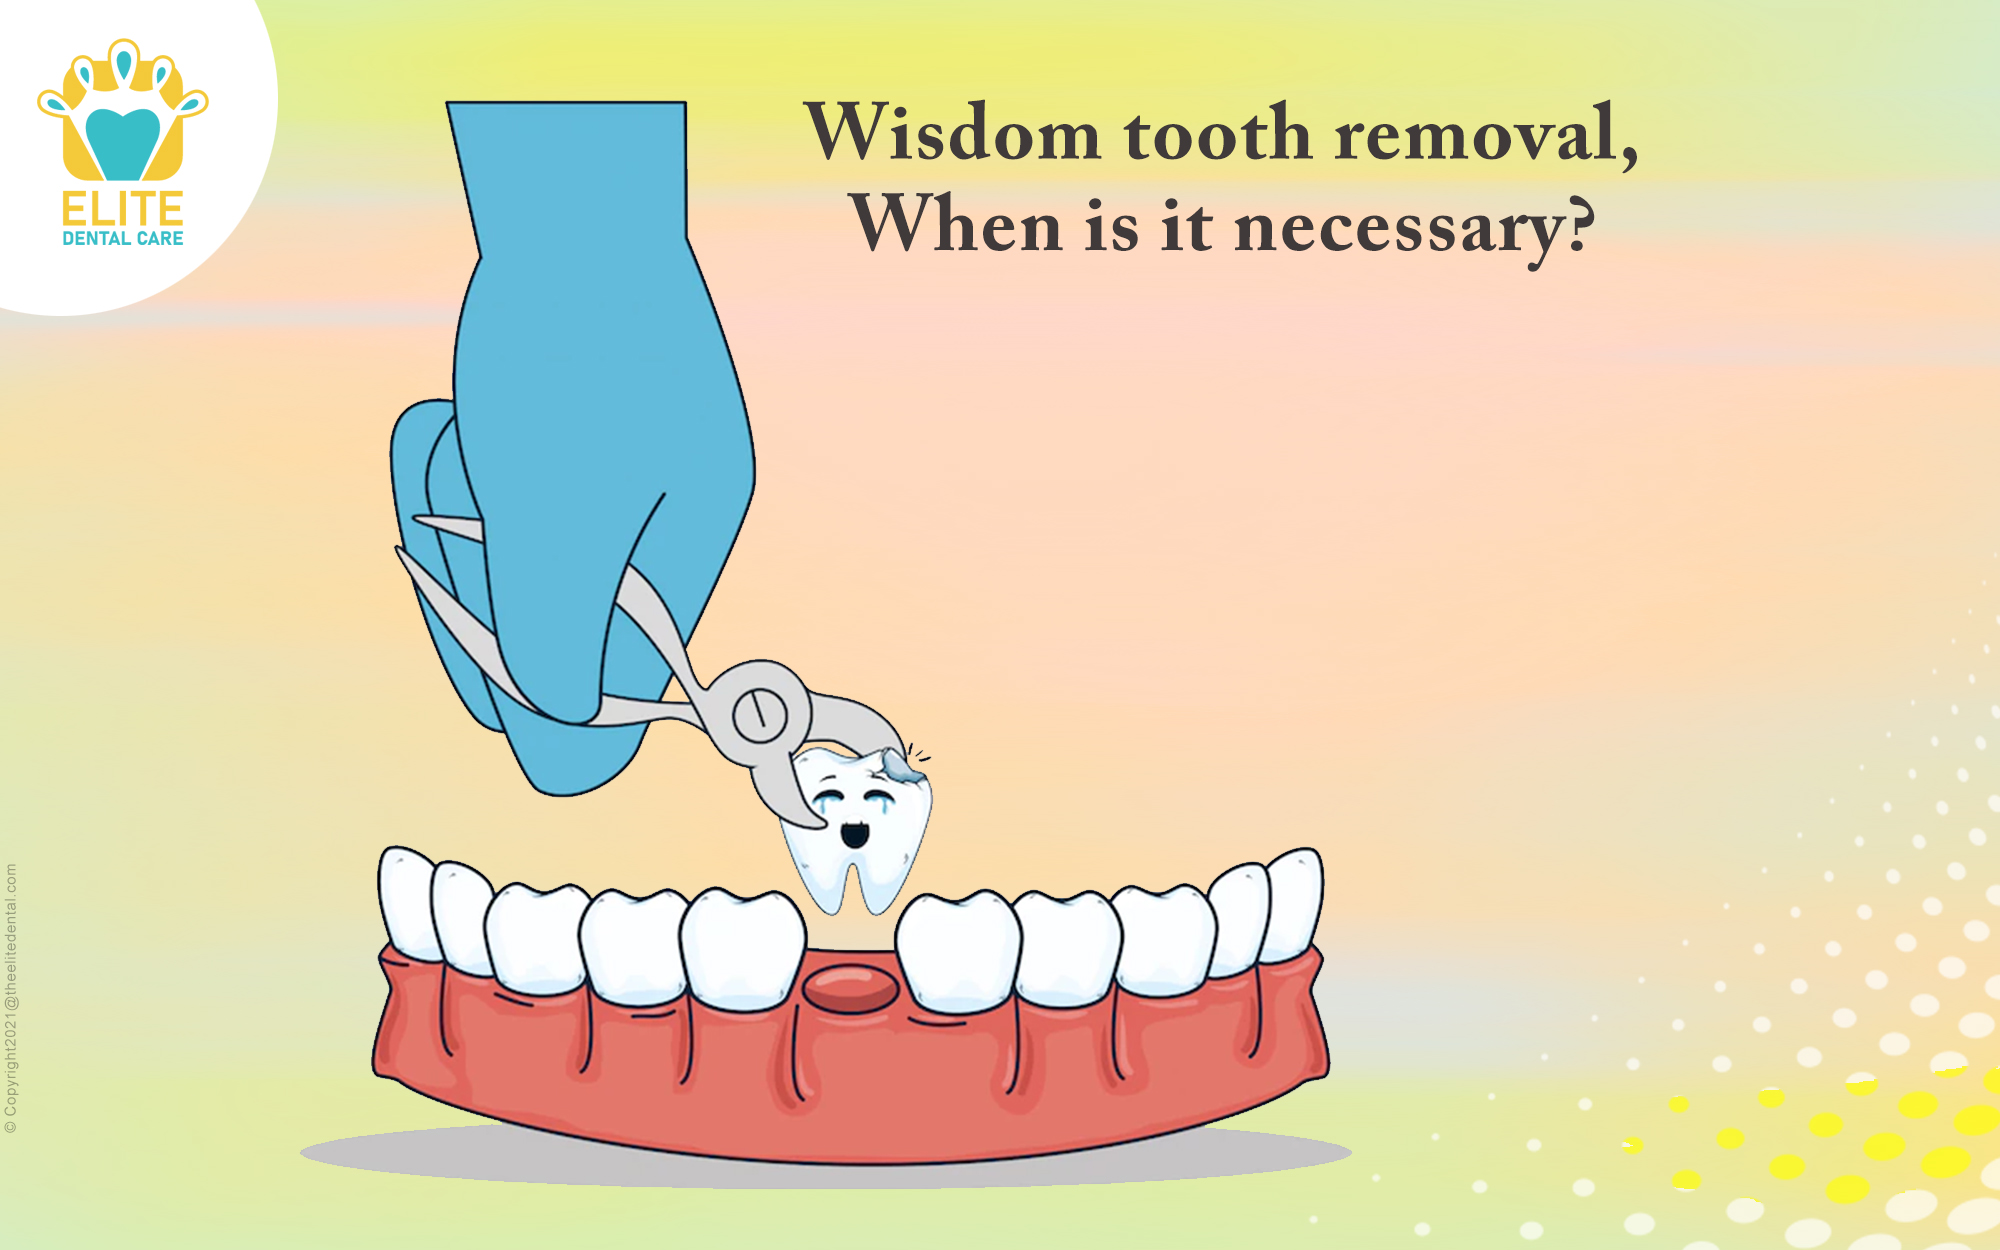 Wisdom Tooth Removal. When is it Necessary?